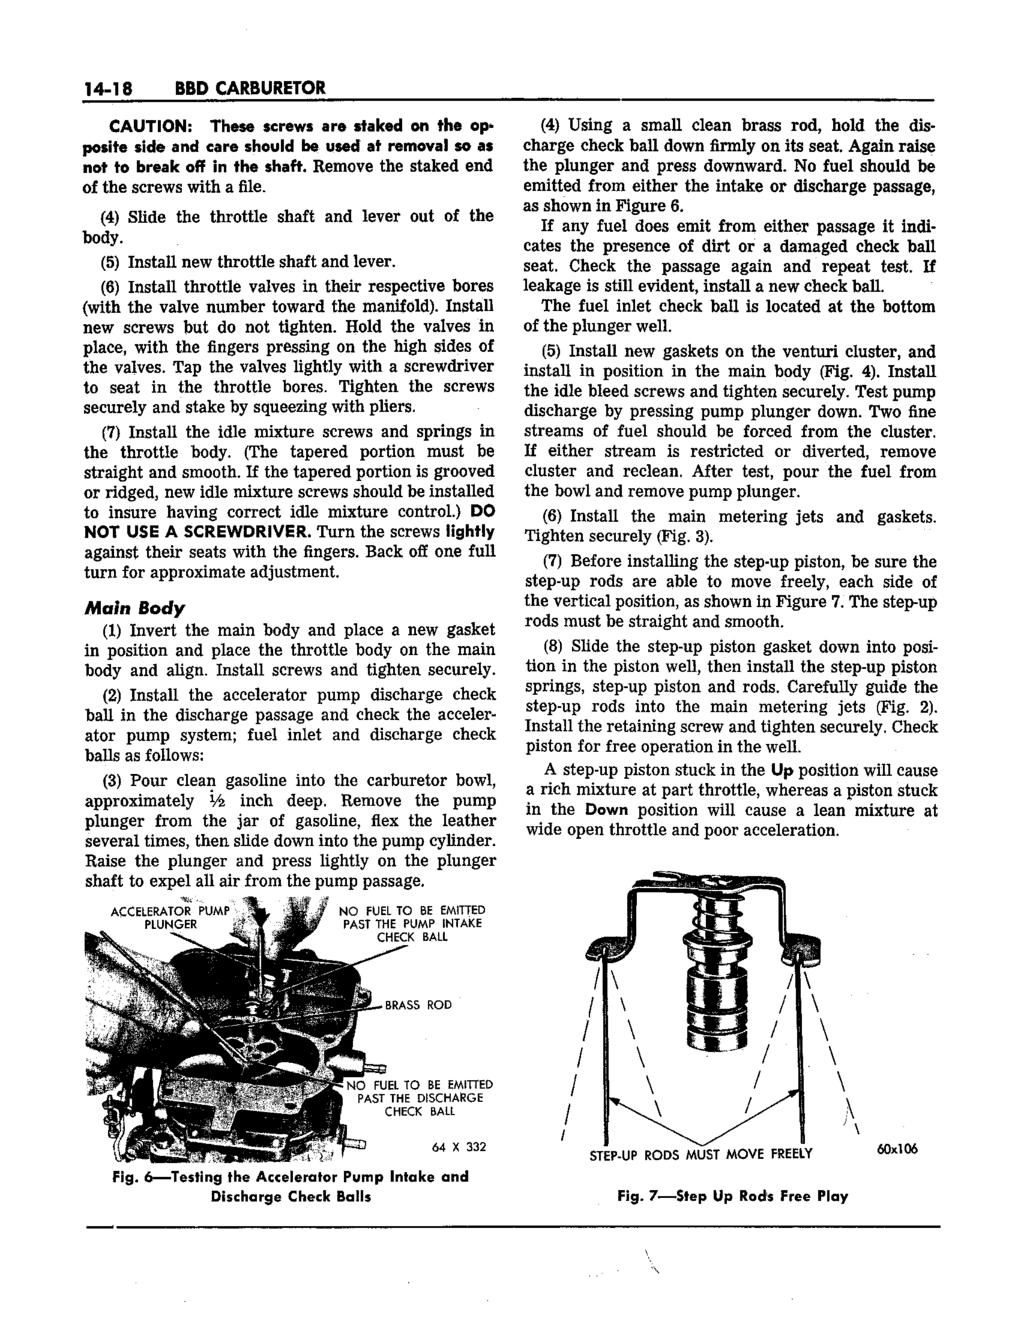 14-18 BBD CARBURETOR CAUTION: These screws are staked on the opposite side and care should he used at removal so as not to break off in the shaft. Remove the staked end of the screws with a file.